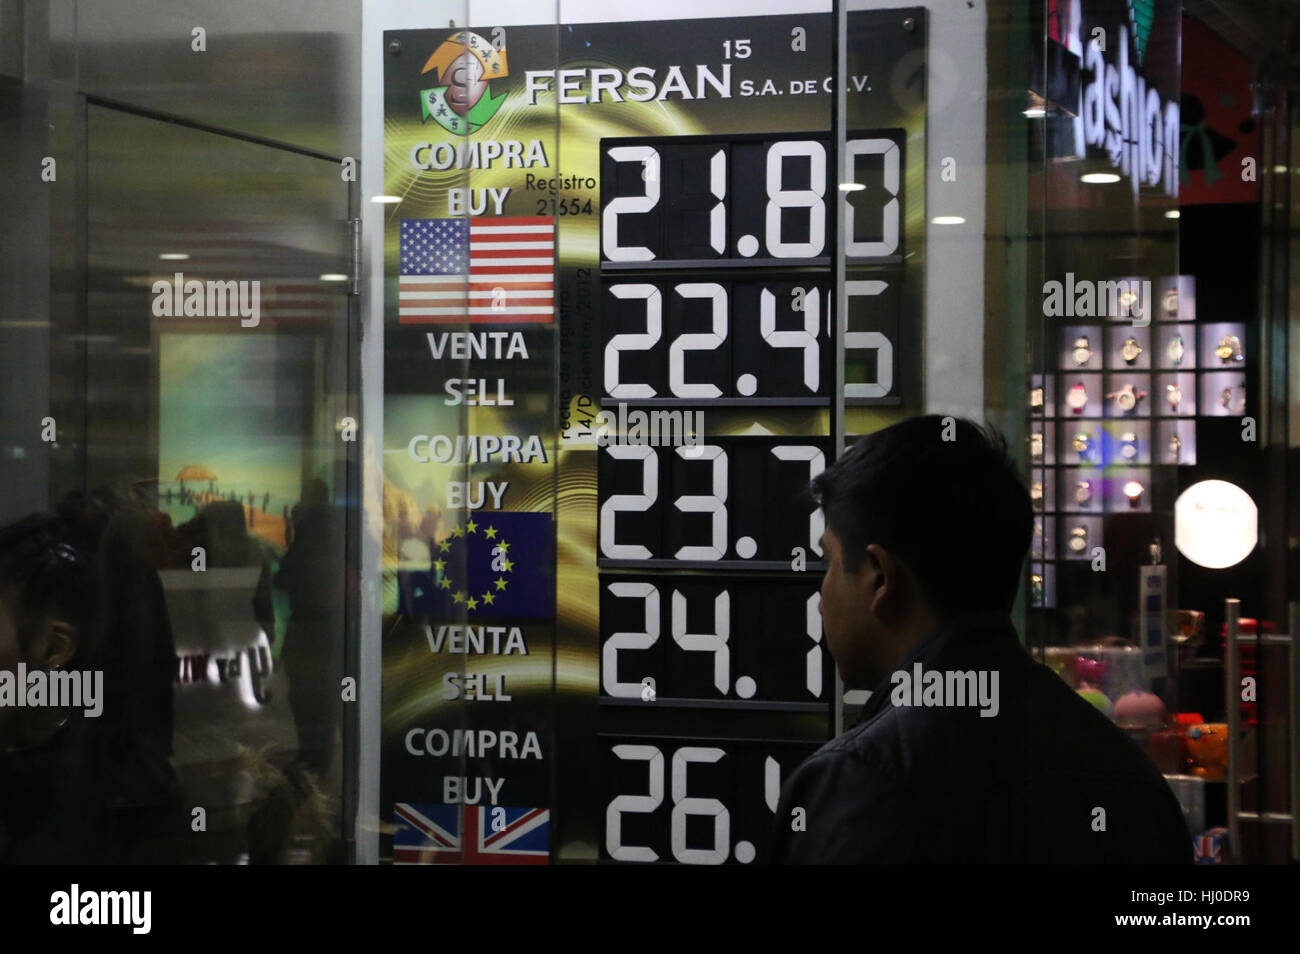 Mexico City, Mexico. 20th Jan, 2017. A man looks at a billboard showing the price of the Mexican peso against the U.S. dollar, in an exchange house at the International Airport of Mexico City, capital of Mexico, Jan. 20, 2017. One U.S. dollar was sold up to 23 Mexican pesos at the airport, prior to Donald Trump's inauguration as the U.S. president on Friday. Credit: Hector Alfaro/ObturadorMX/Xinhua/Alamy Live News Stock Photo